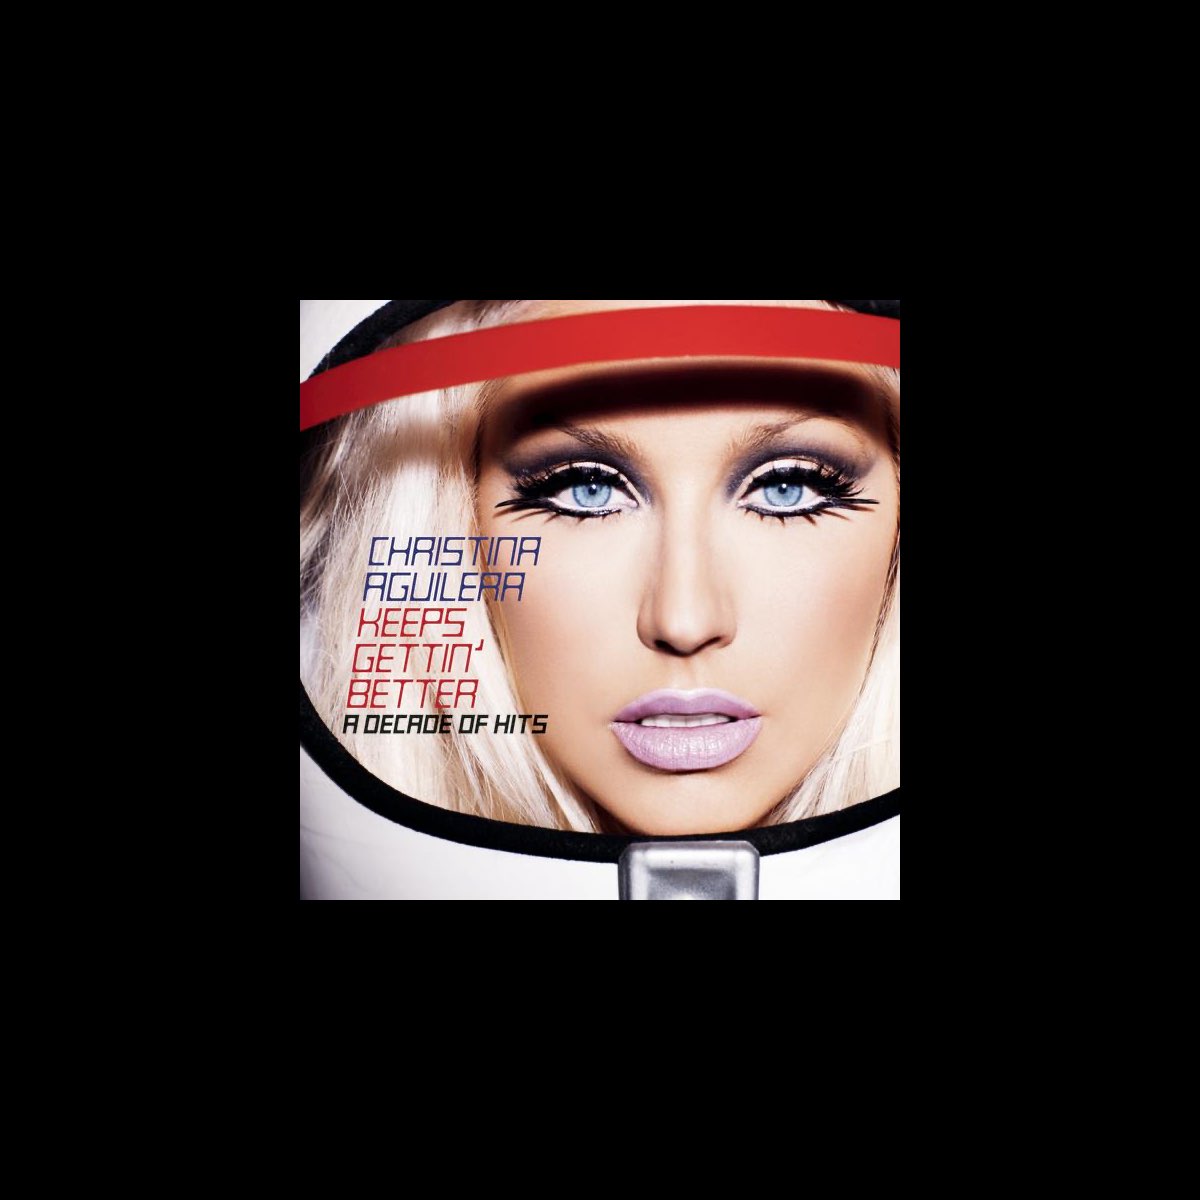 Keeps Gettin' Better: A Decade of Hits by Christina Aguilera on Apple Music